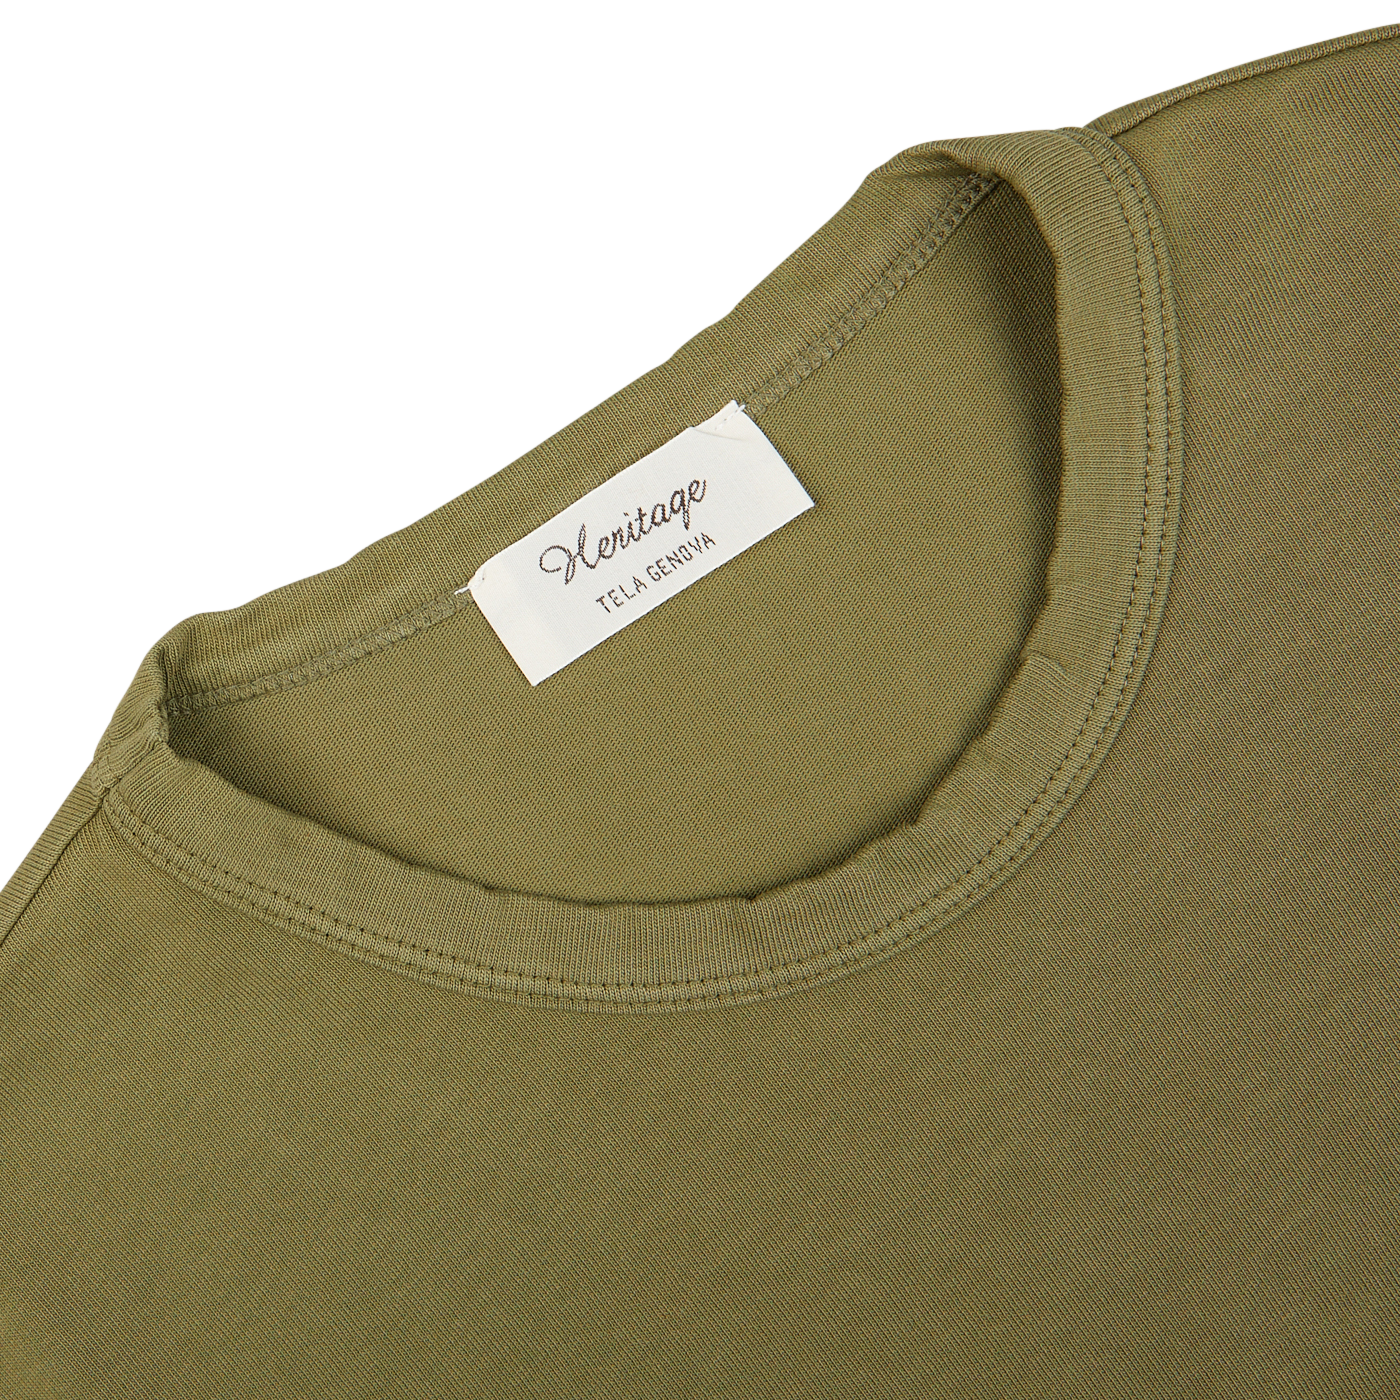 Close-up of a Tela Genova green Heavy Organic Cotton T-Shirt's collar with a white clothing label.